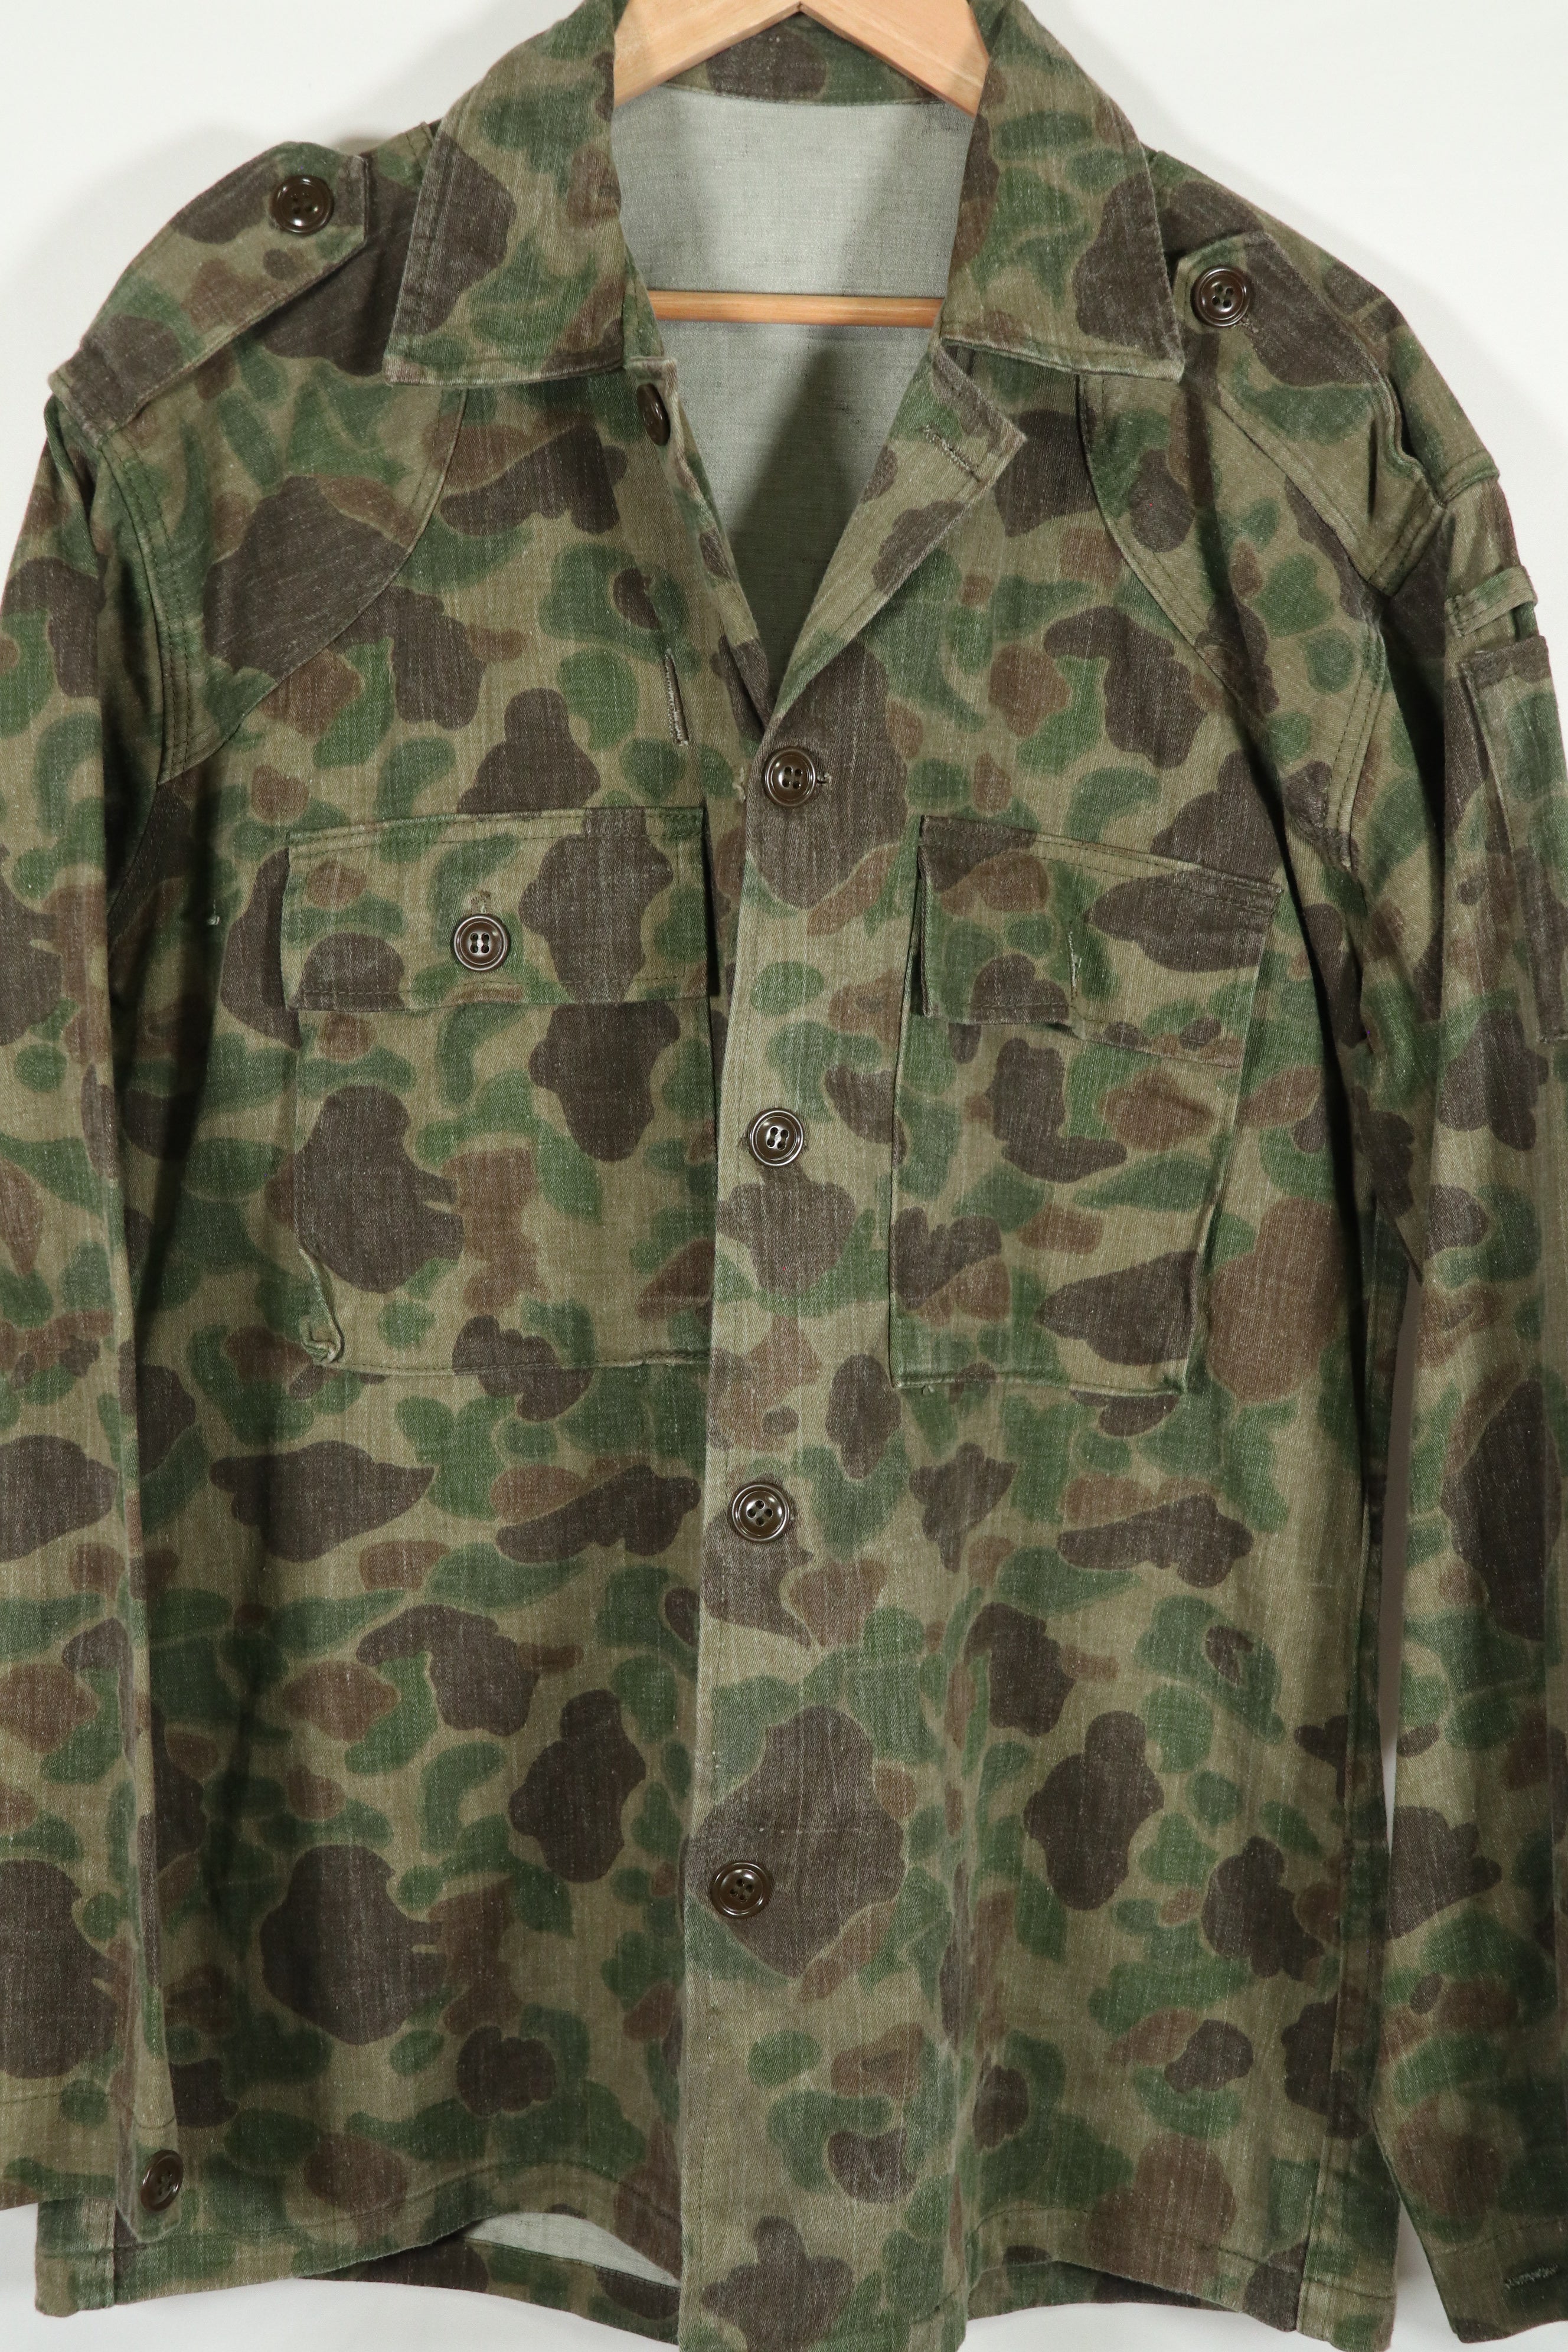 Civilian Duck Hunter Camouflage Hunting Jacket Local Made Frogskin Camouflage Used